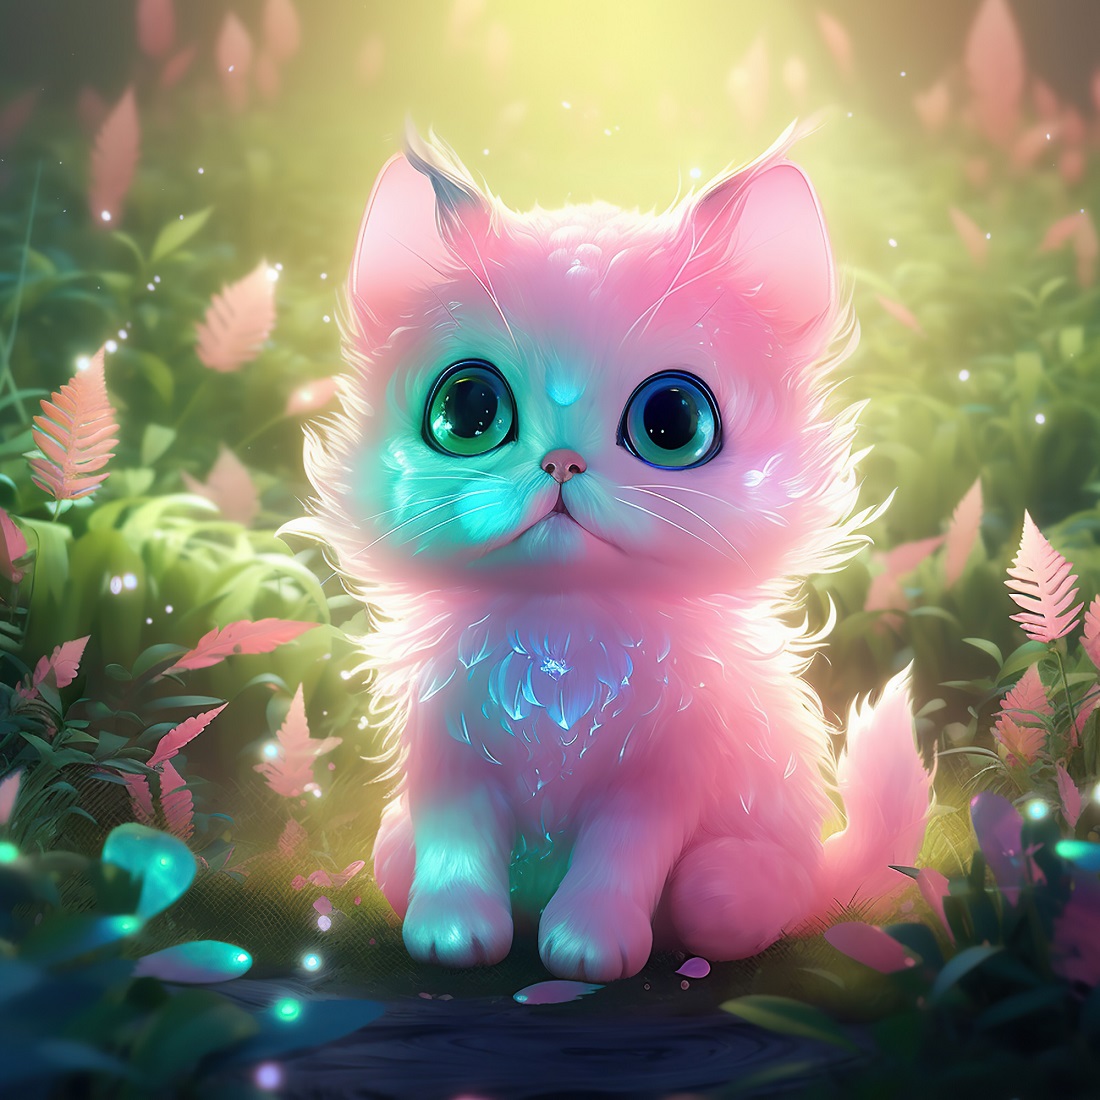 Kittens playing forest generative preview image.